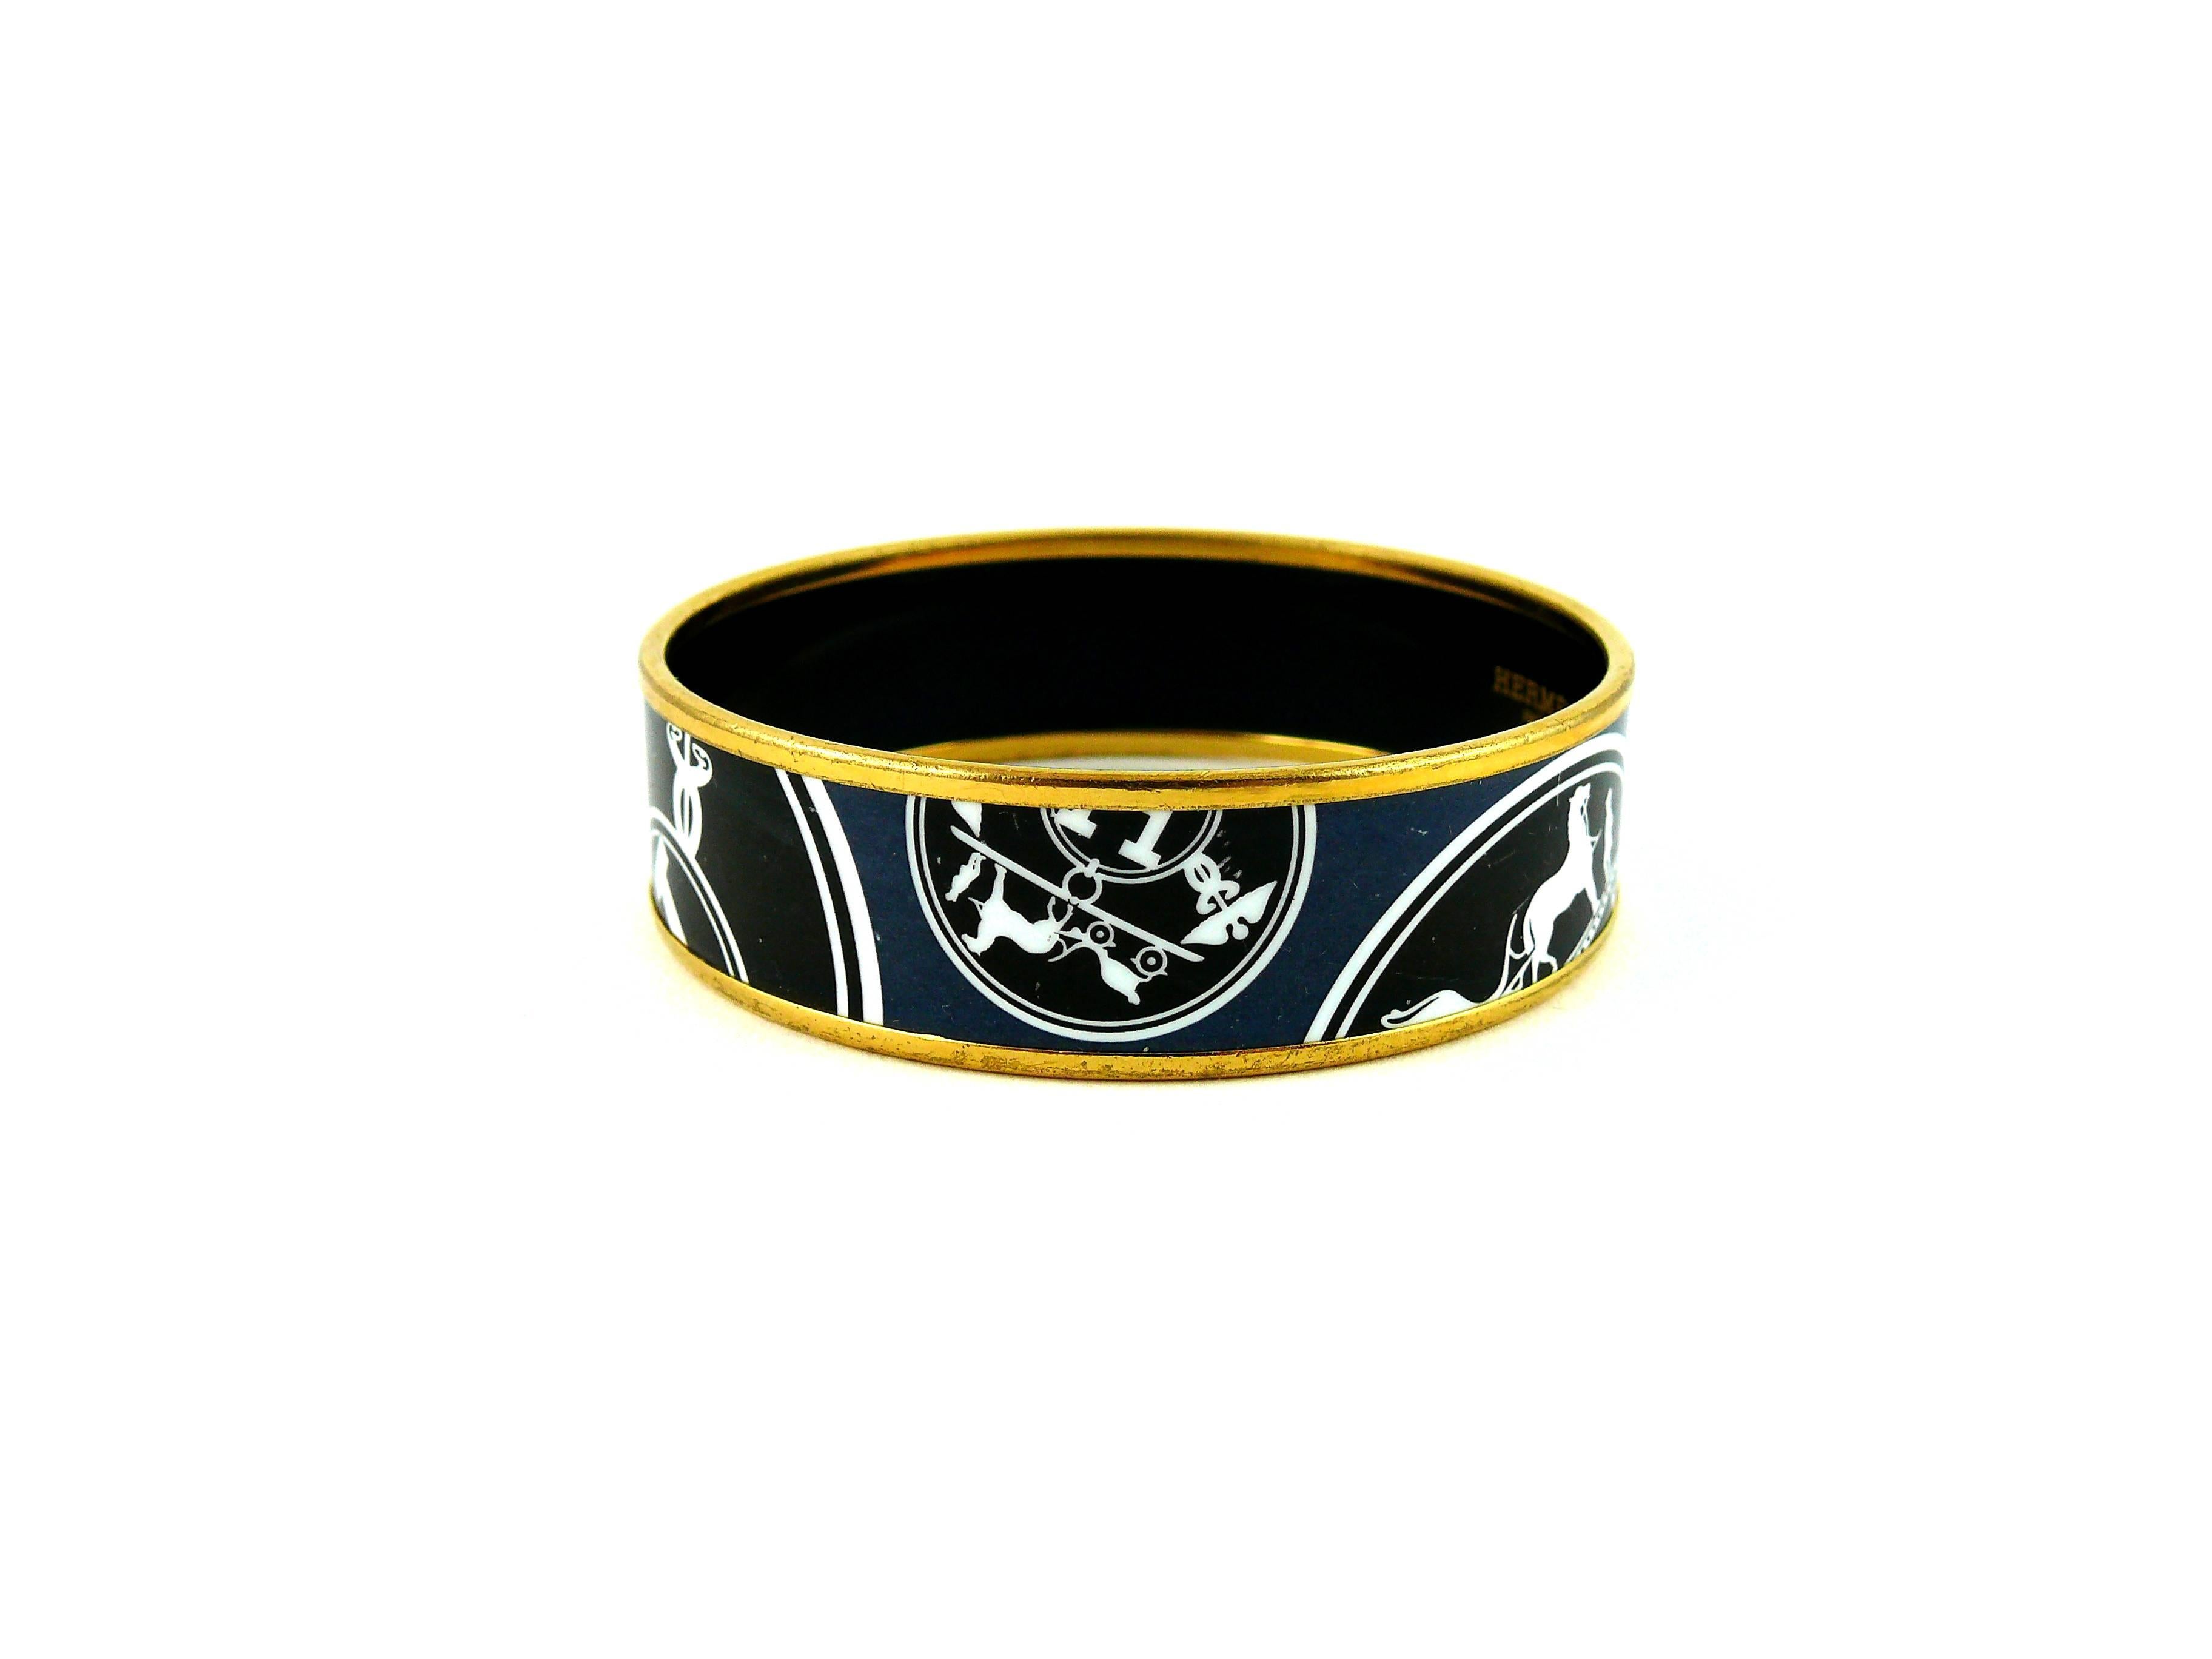 HERMES Paris gorgeous enamel printed wide bracelet.

Iconic white and black Hermes carriage logo on a blue background.

Gold plated rim.

Marked Hermes Paris Made in France + O.

